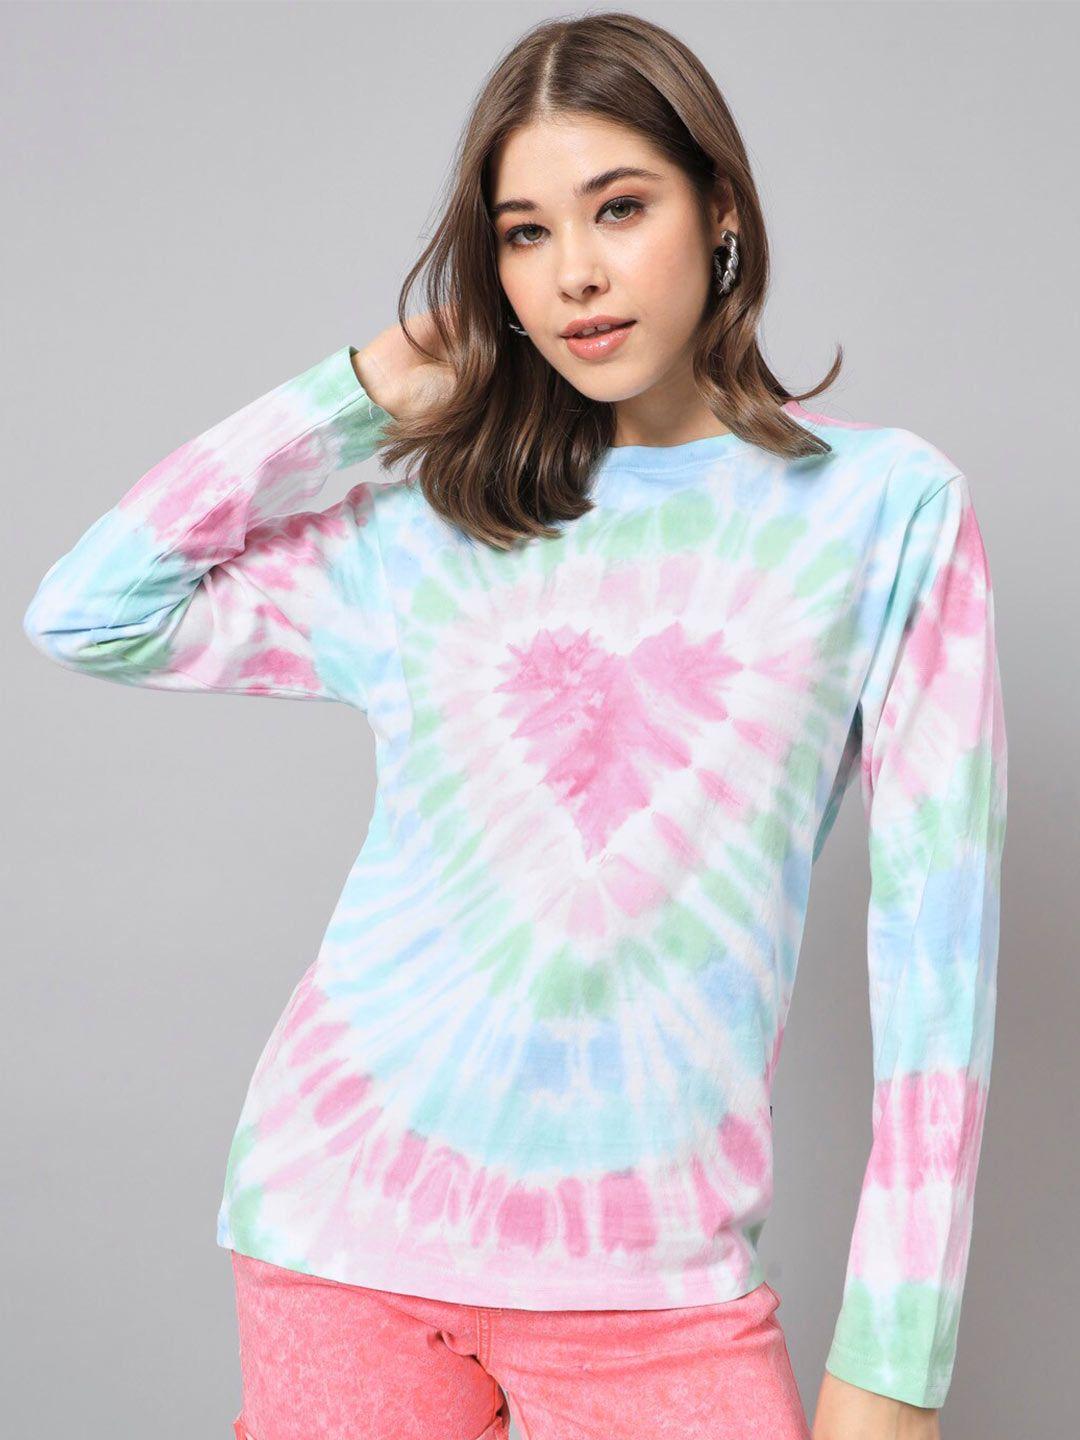 the-dry-state-white-&-pink-tie-&-dye-dyed-loose-fit-cotton-casual-t-shirt